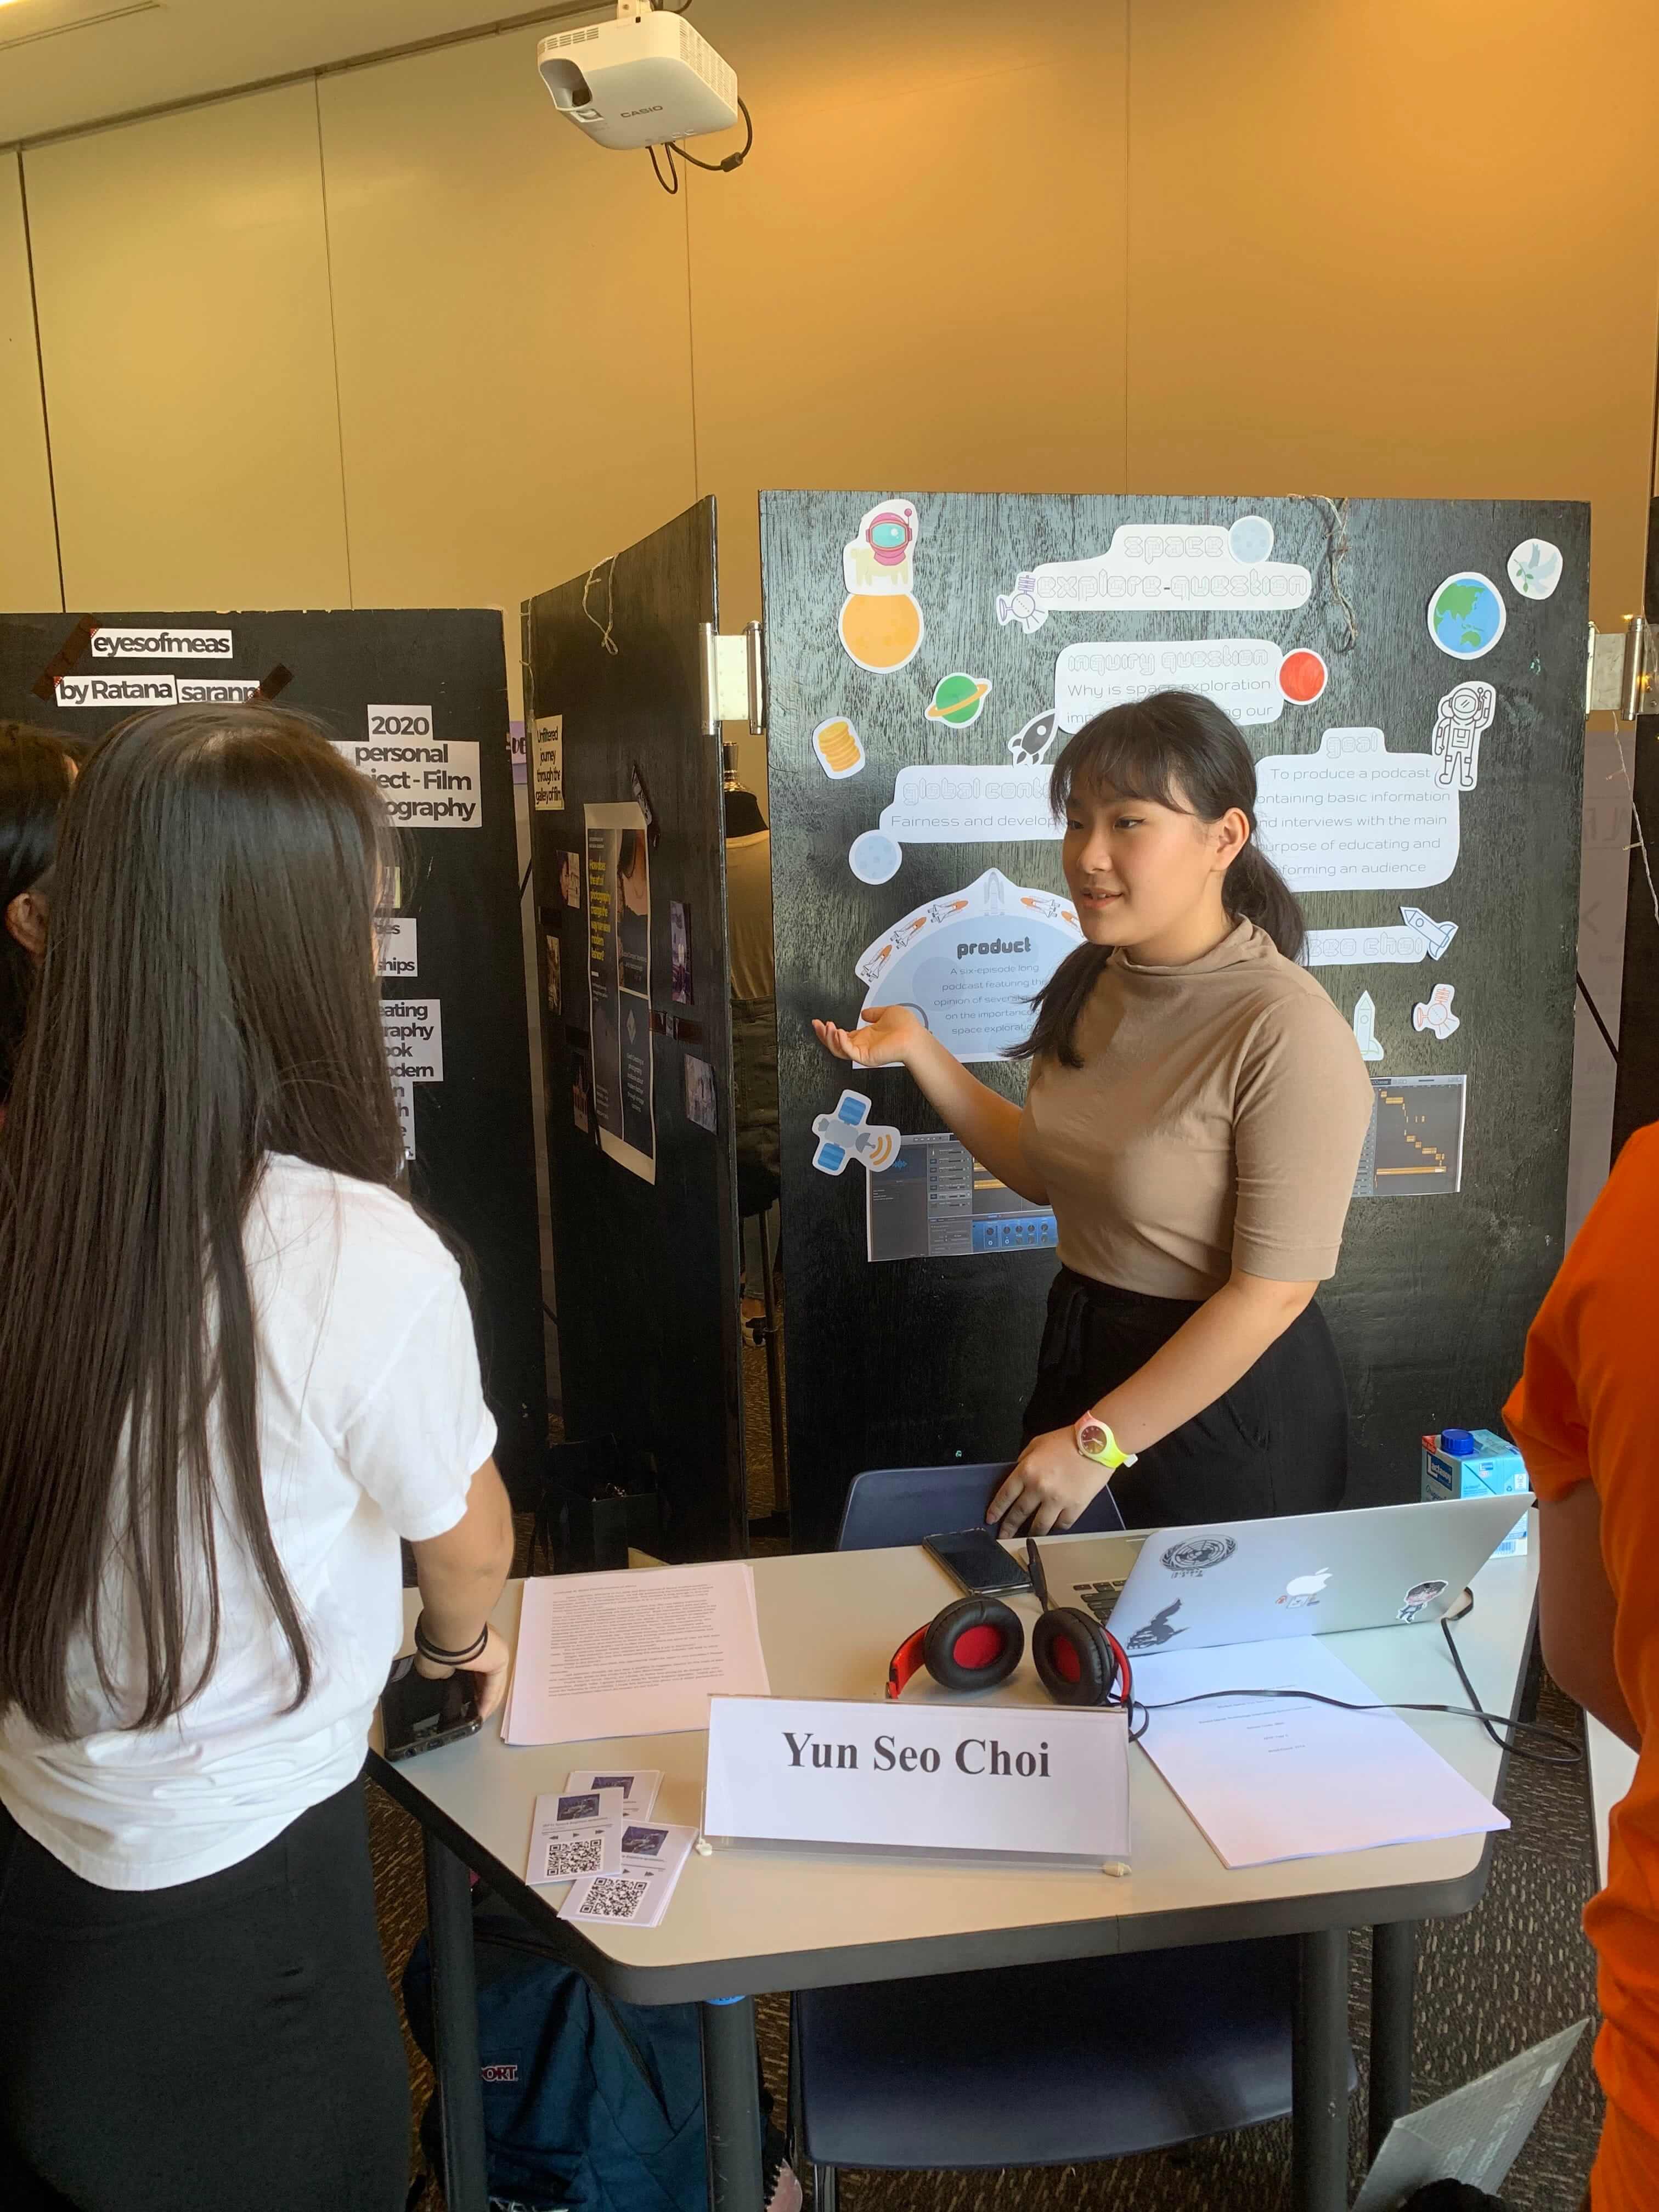 Northbridge IB MYP students recently showcased their fabulous Personal Projects at school-northbridge-ib-myp-students-recently-showcased-their-fabulous-personal-projects-at-school-IMG_2522